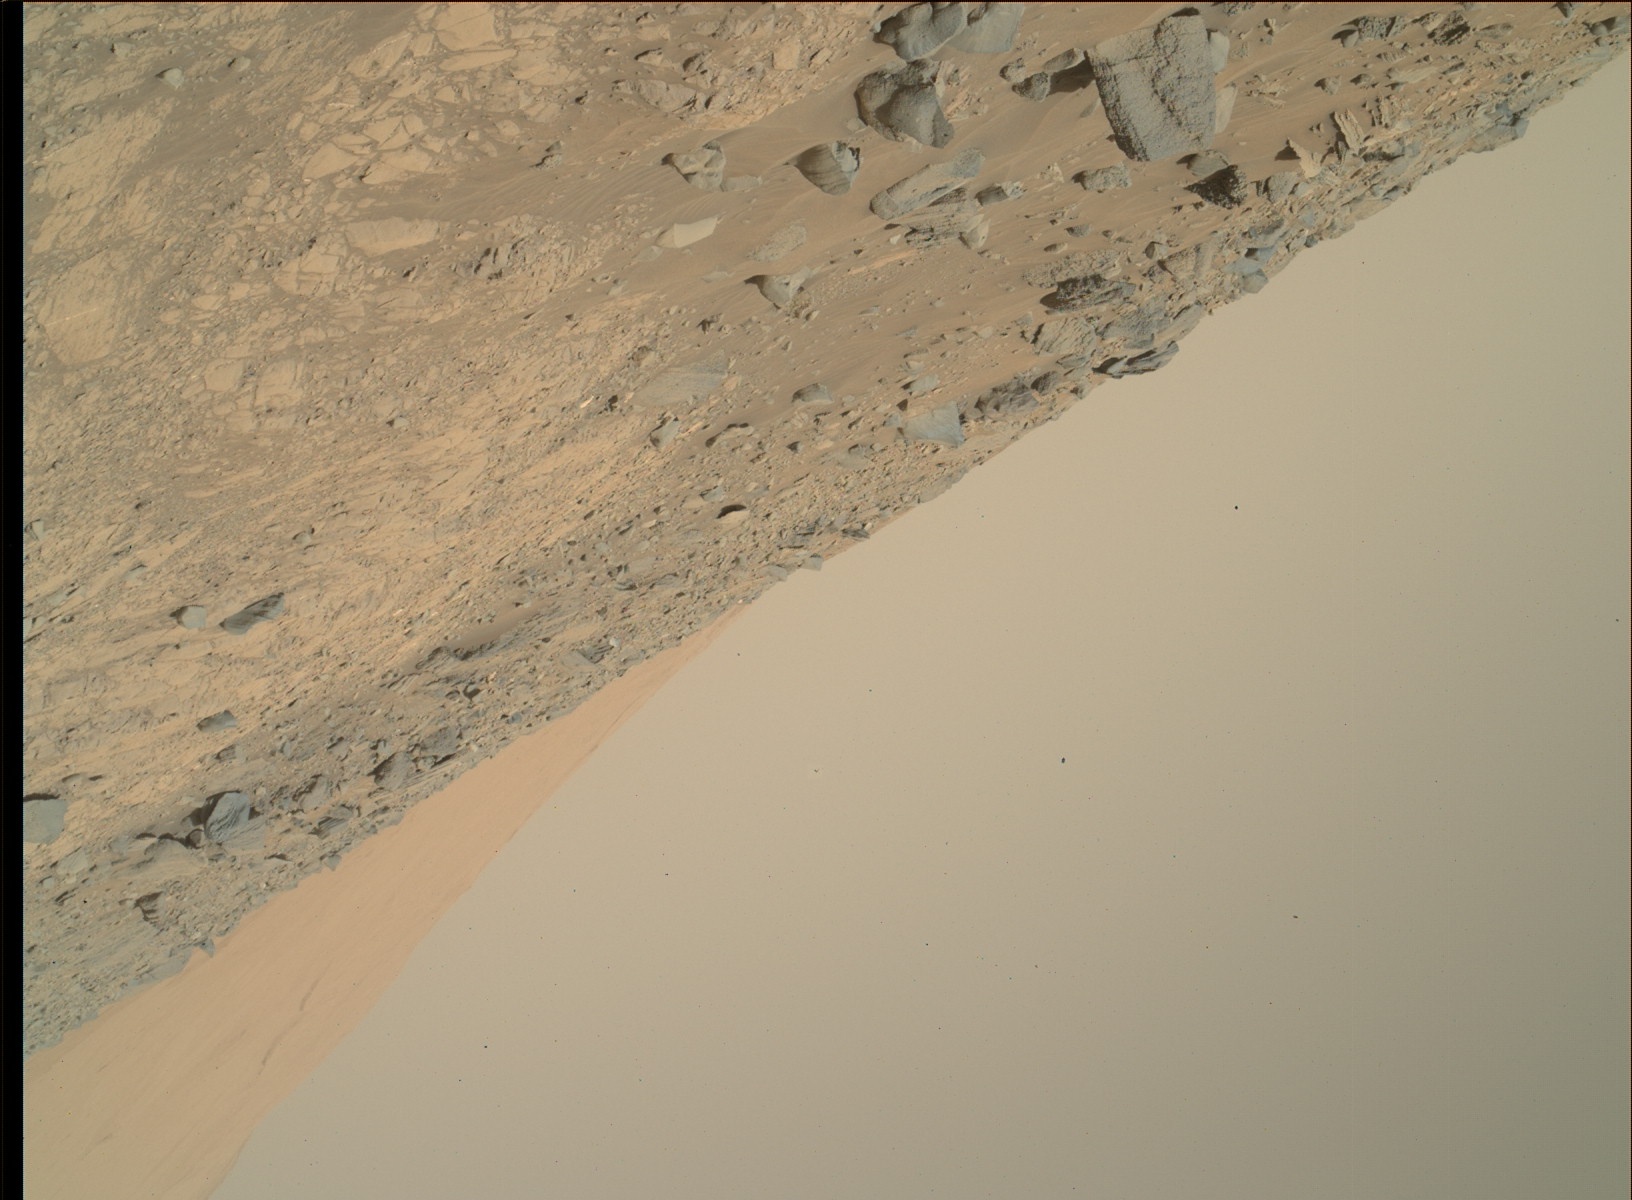 Nasa's Mars rover Curiosity acquired this image using its Mars Hand Lens Imager (MAHLI) on Sol 1104